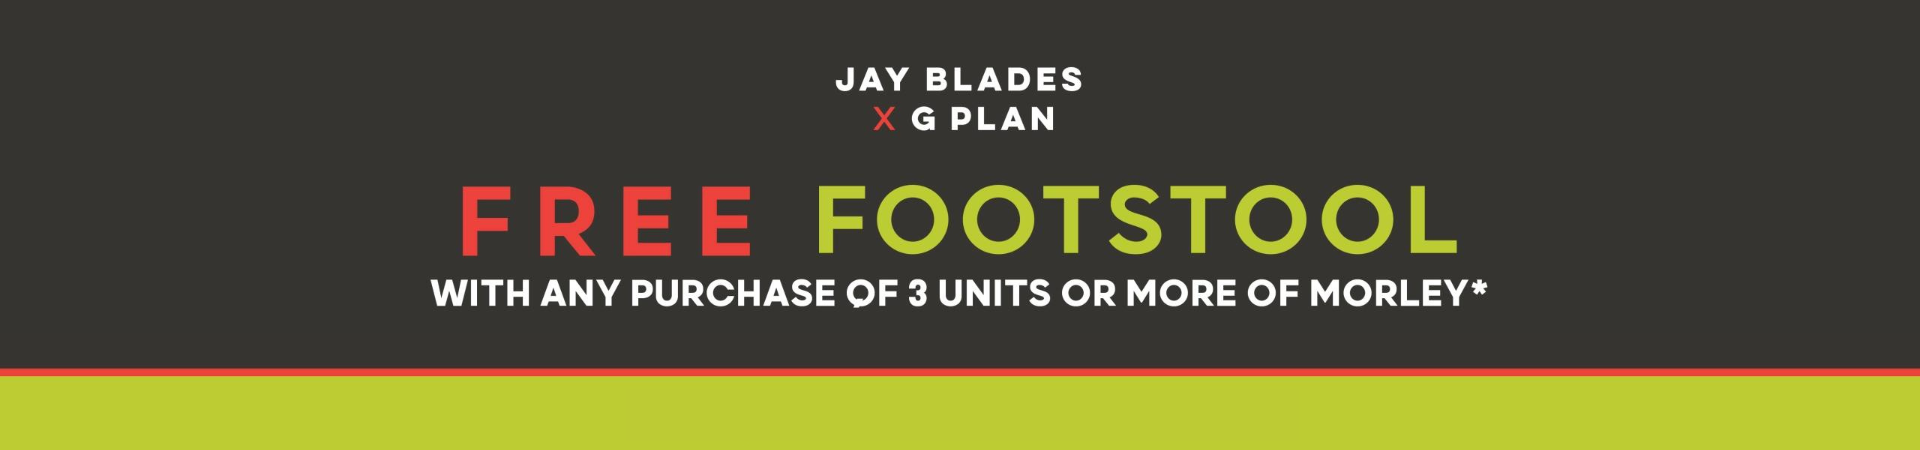 Jay Blades Free Footstool Collections Banner 